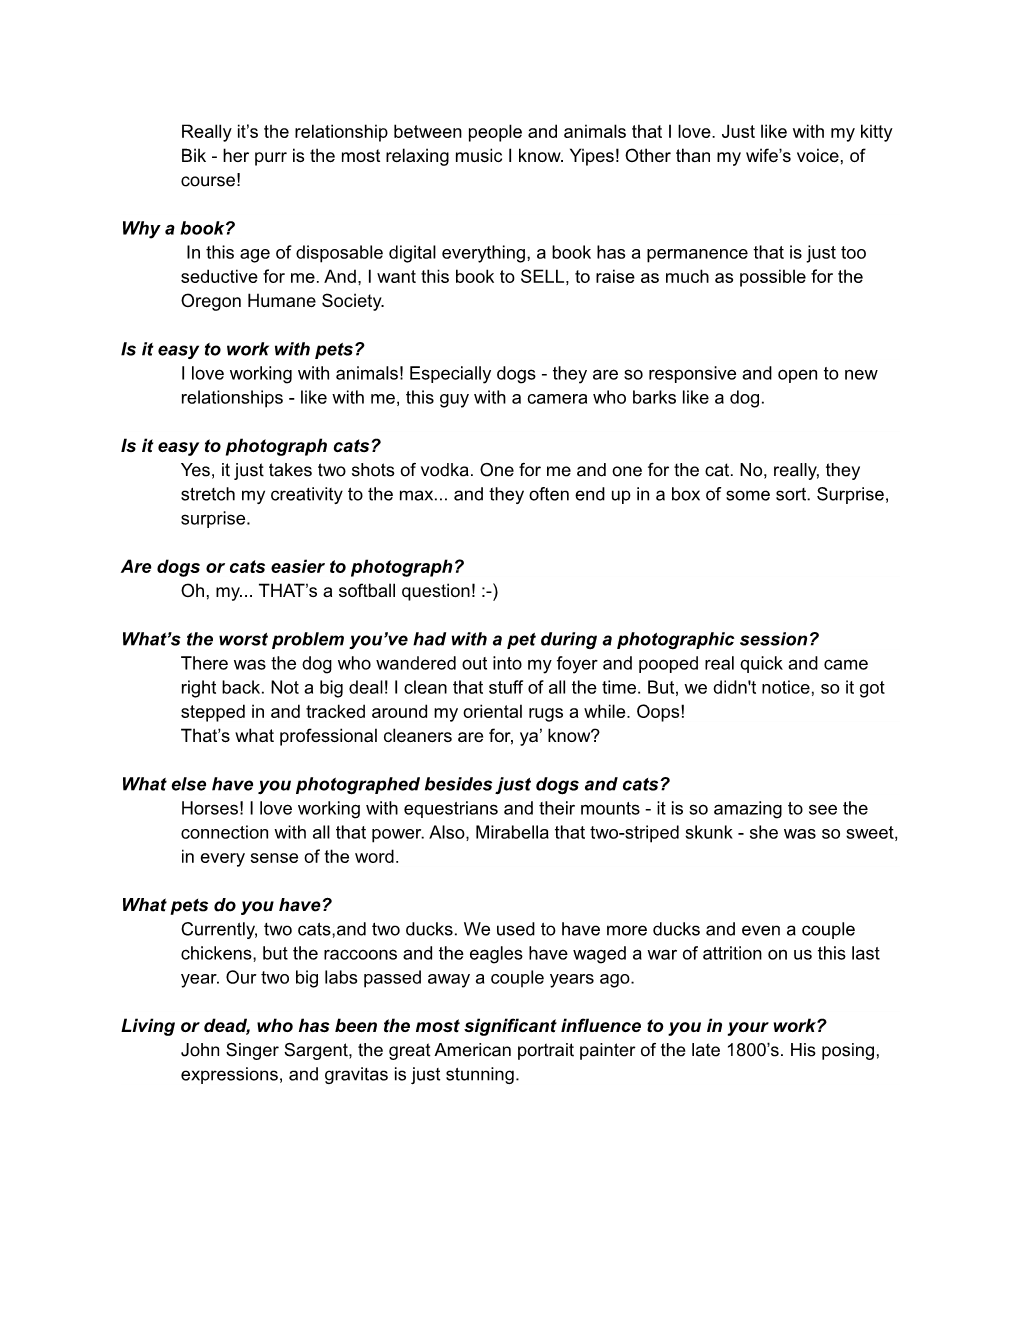 Background and Interview Questions